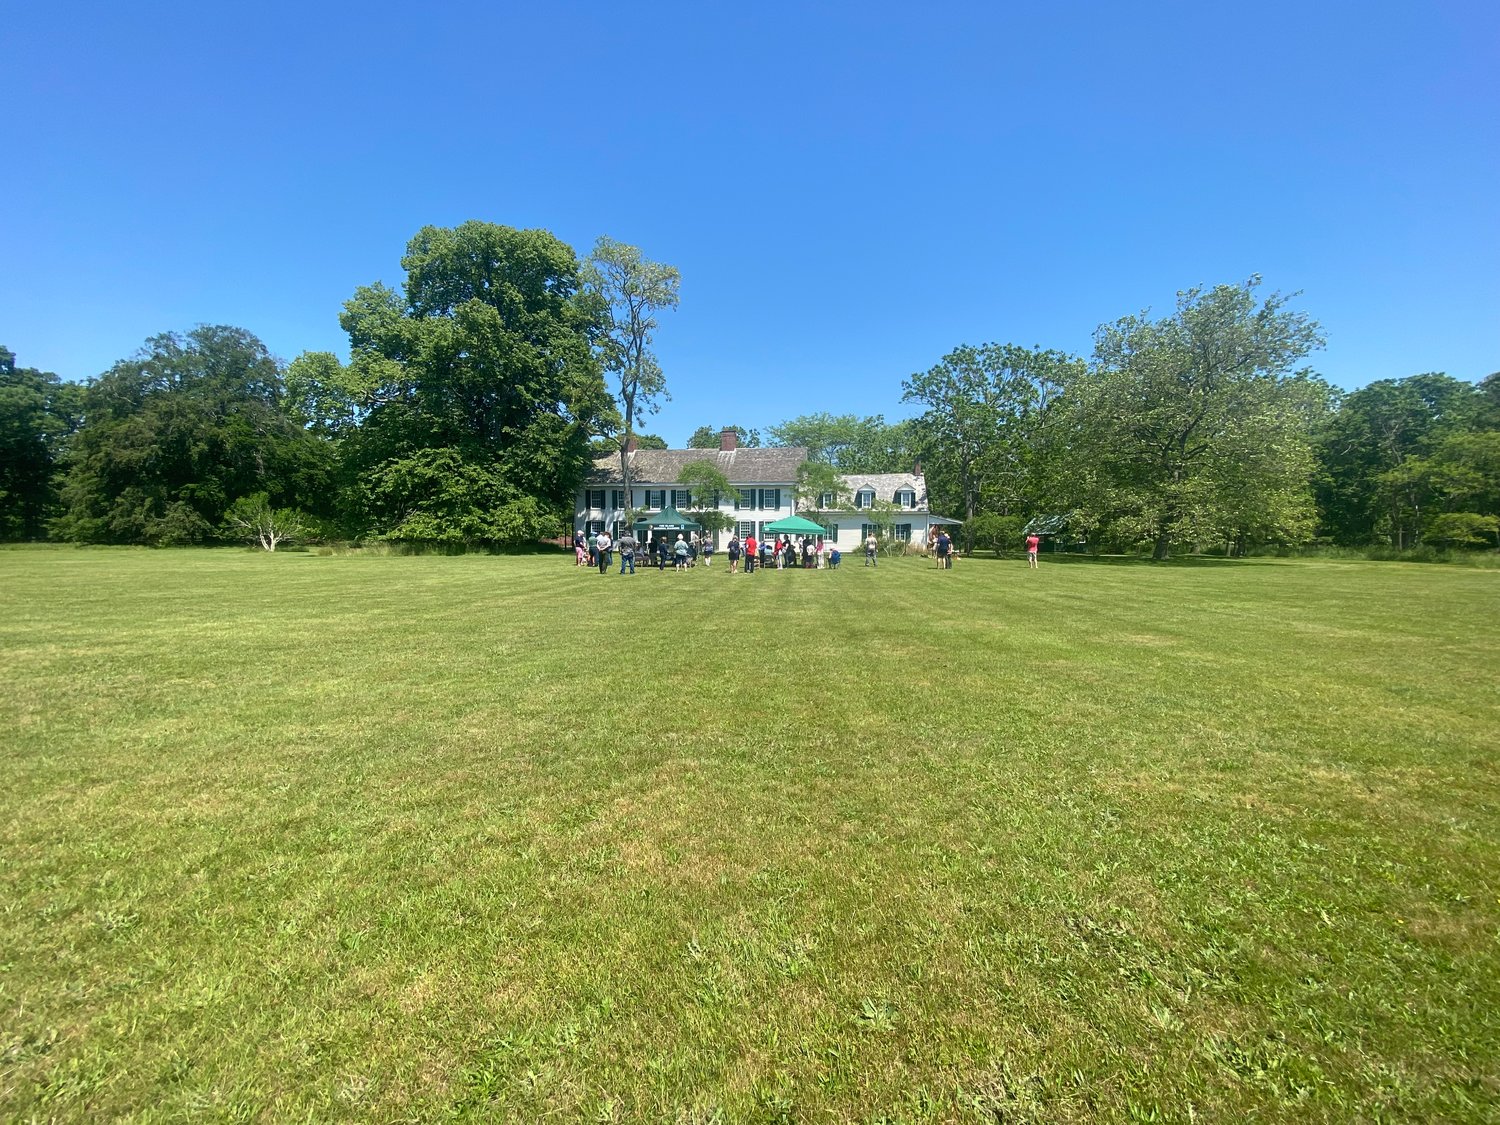 The view of the Tri-Hamlet Day festivities and the William Floyd Manor from the “pightle” (an old English word for yard enclosure) that sits in front of the Manor.